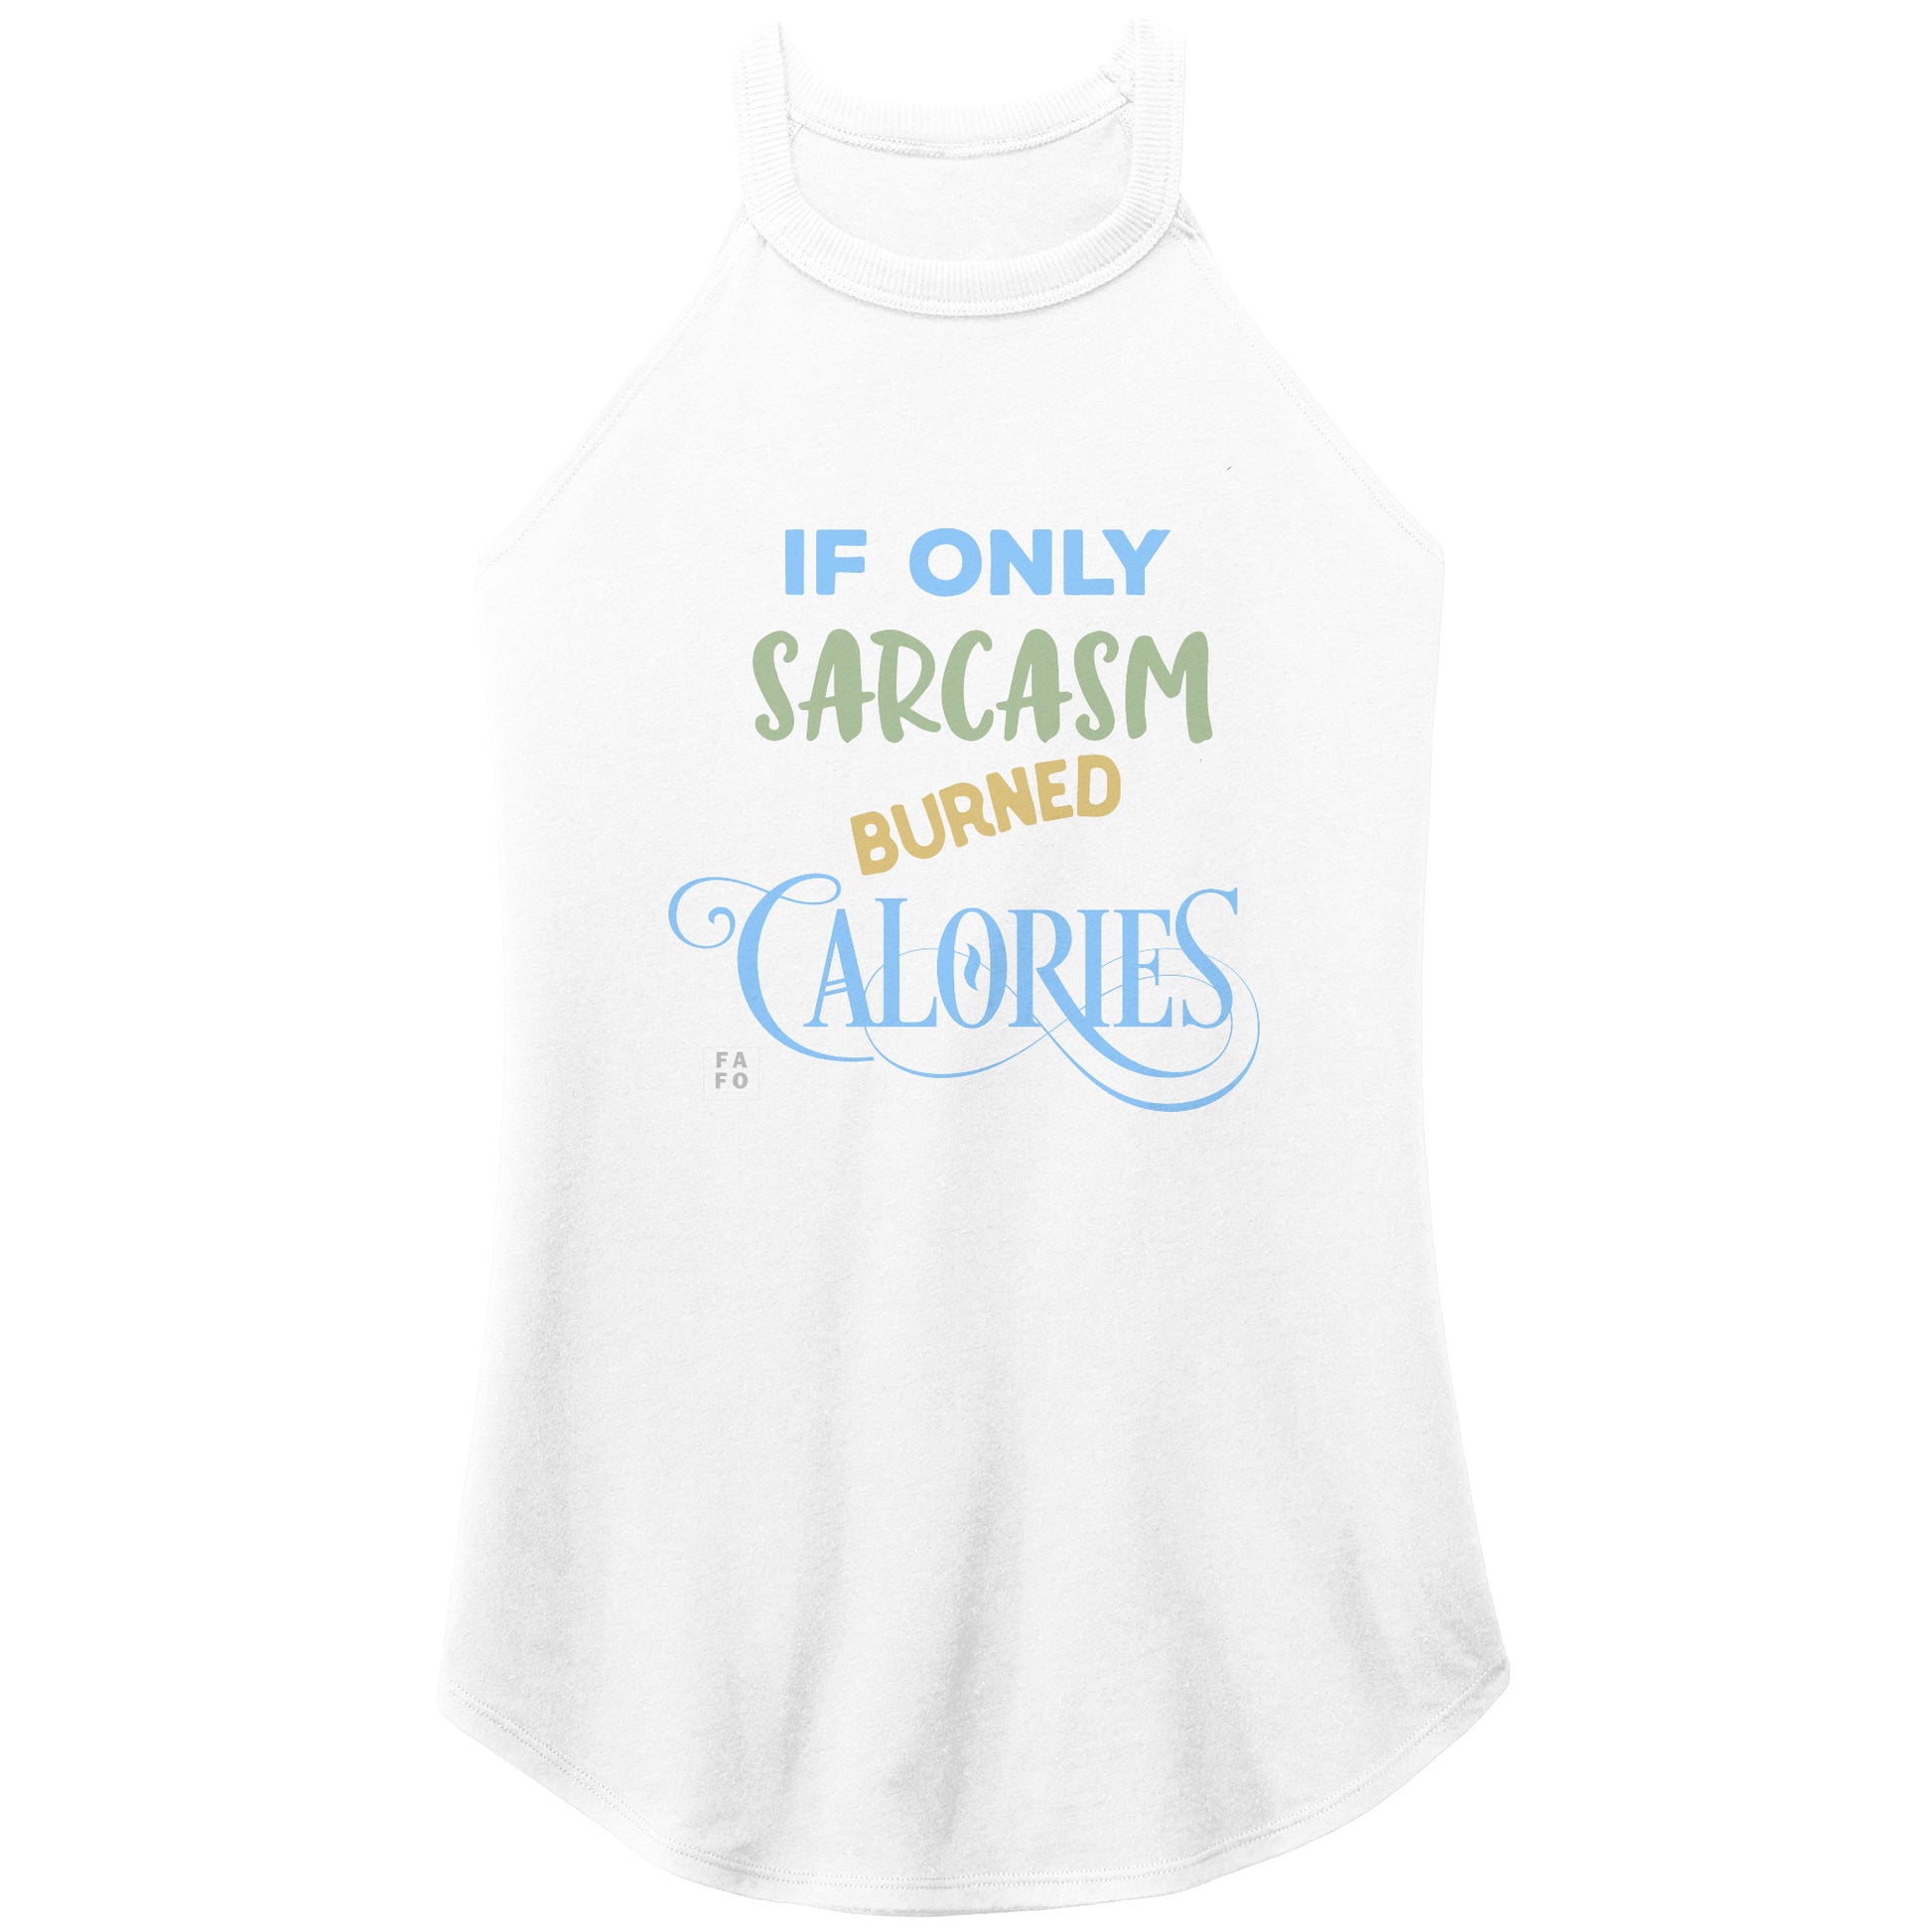 Womens Rocker Tank - If Only Sarcasm Burned Calories - White